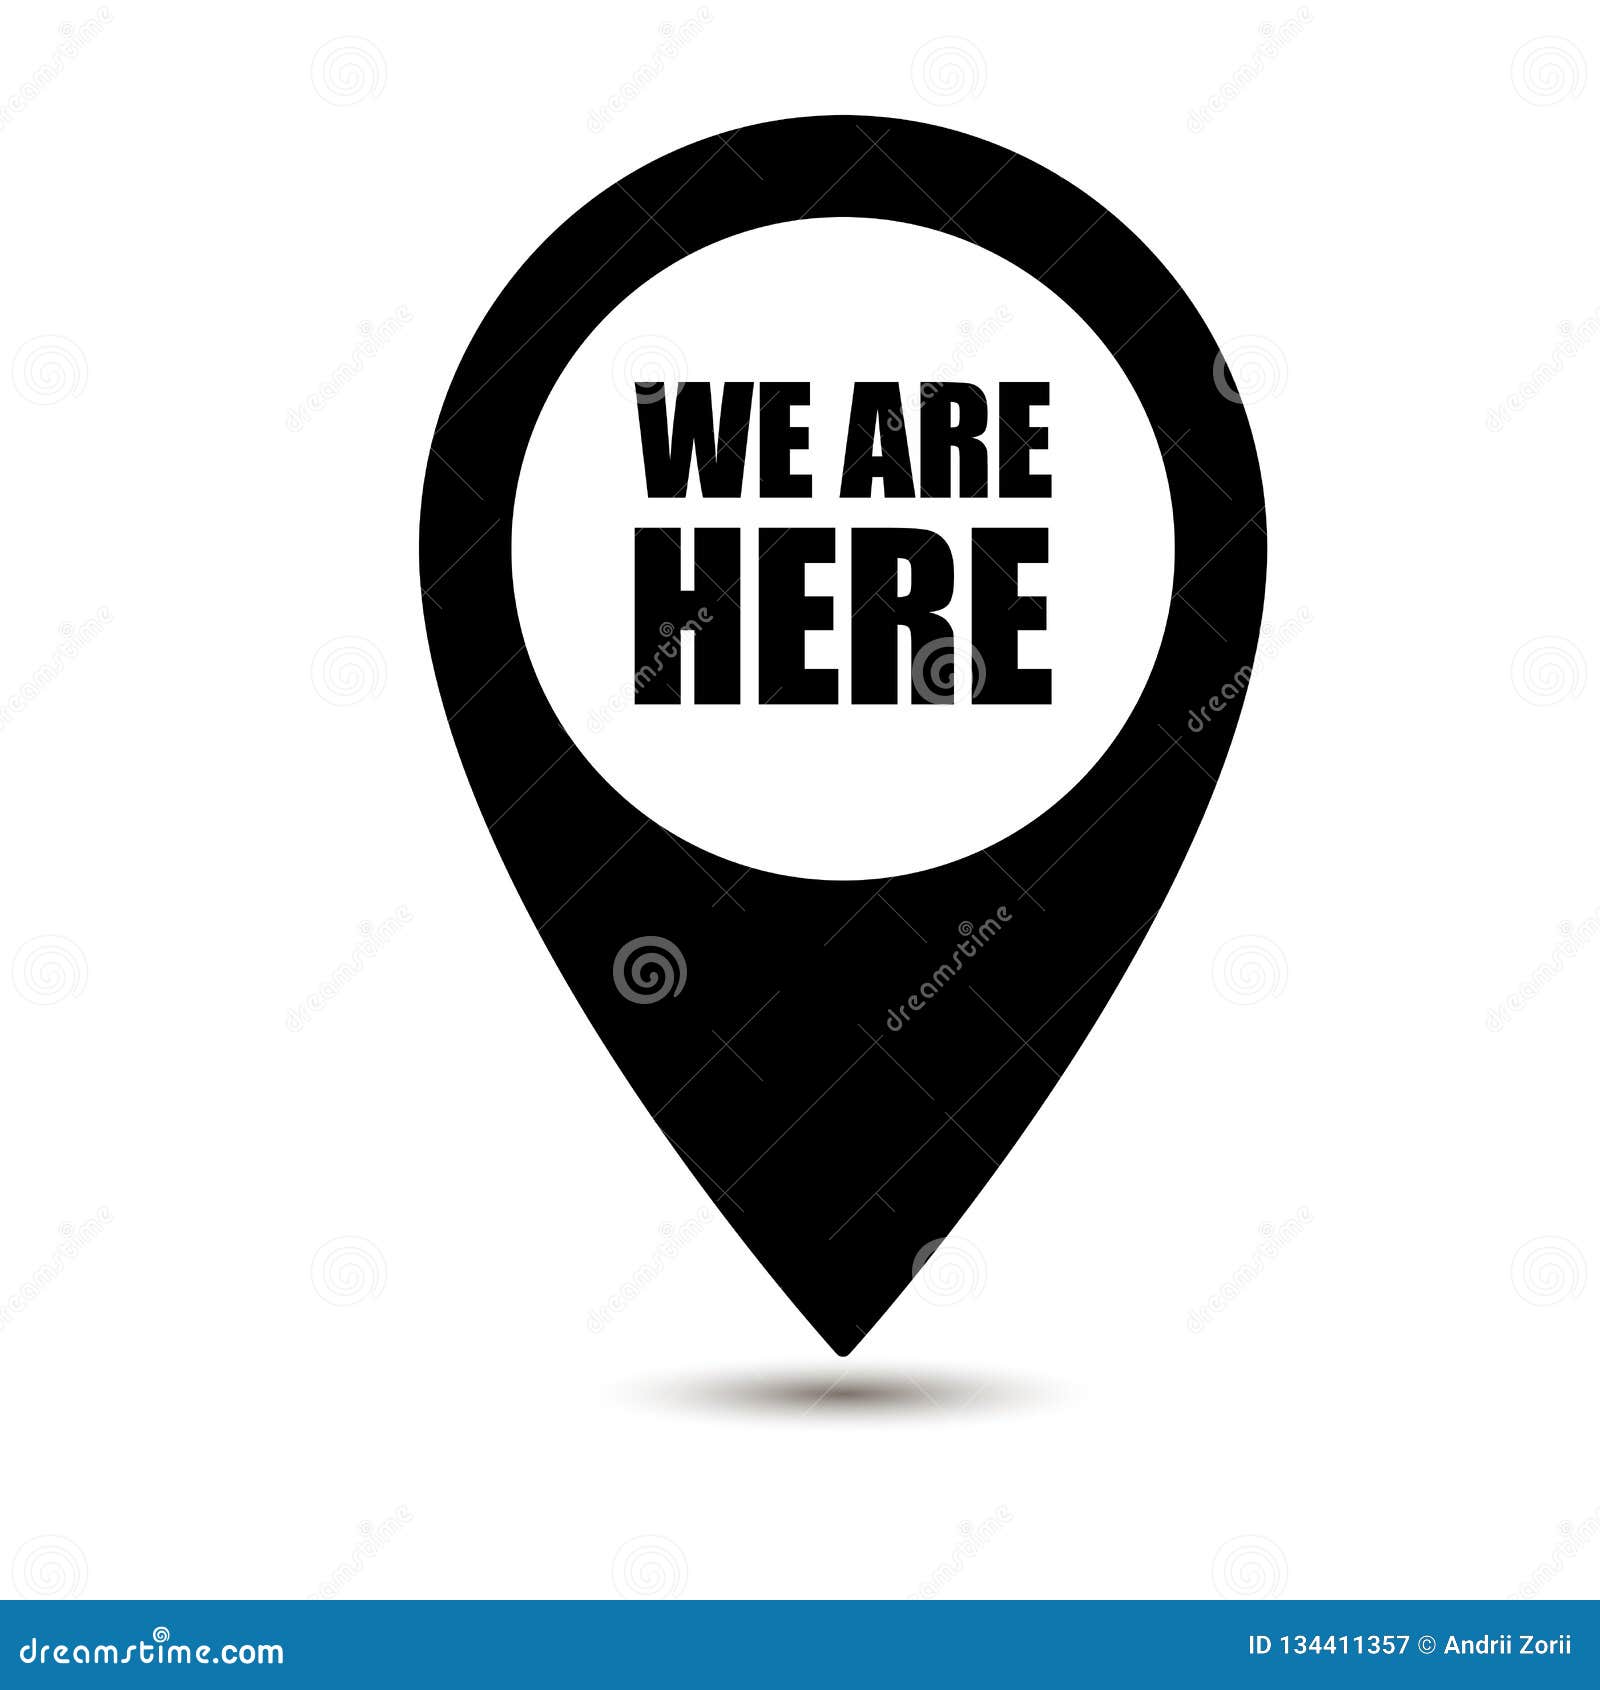 We Are Here Map Pointer Icon Isolated On White Background We Are Here Map Pin Isolated On White Background Vector Illustration Stock Illustration Illustration Of Destination Concept 134411357